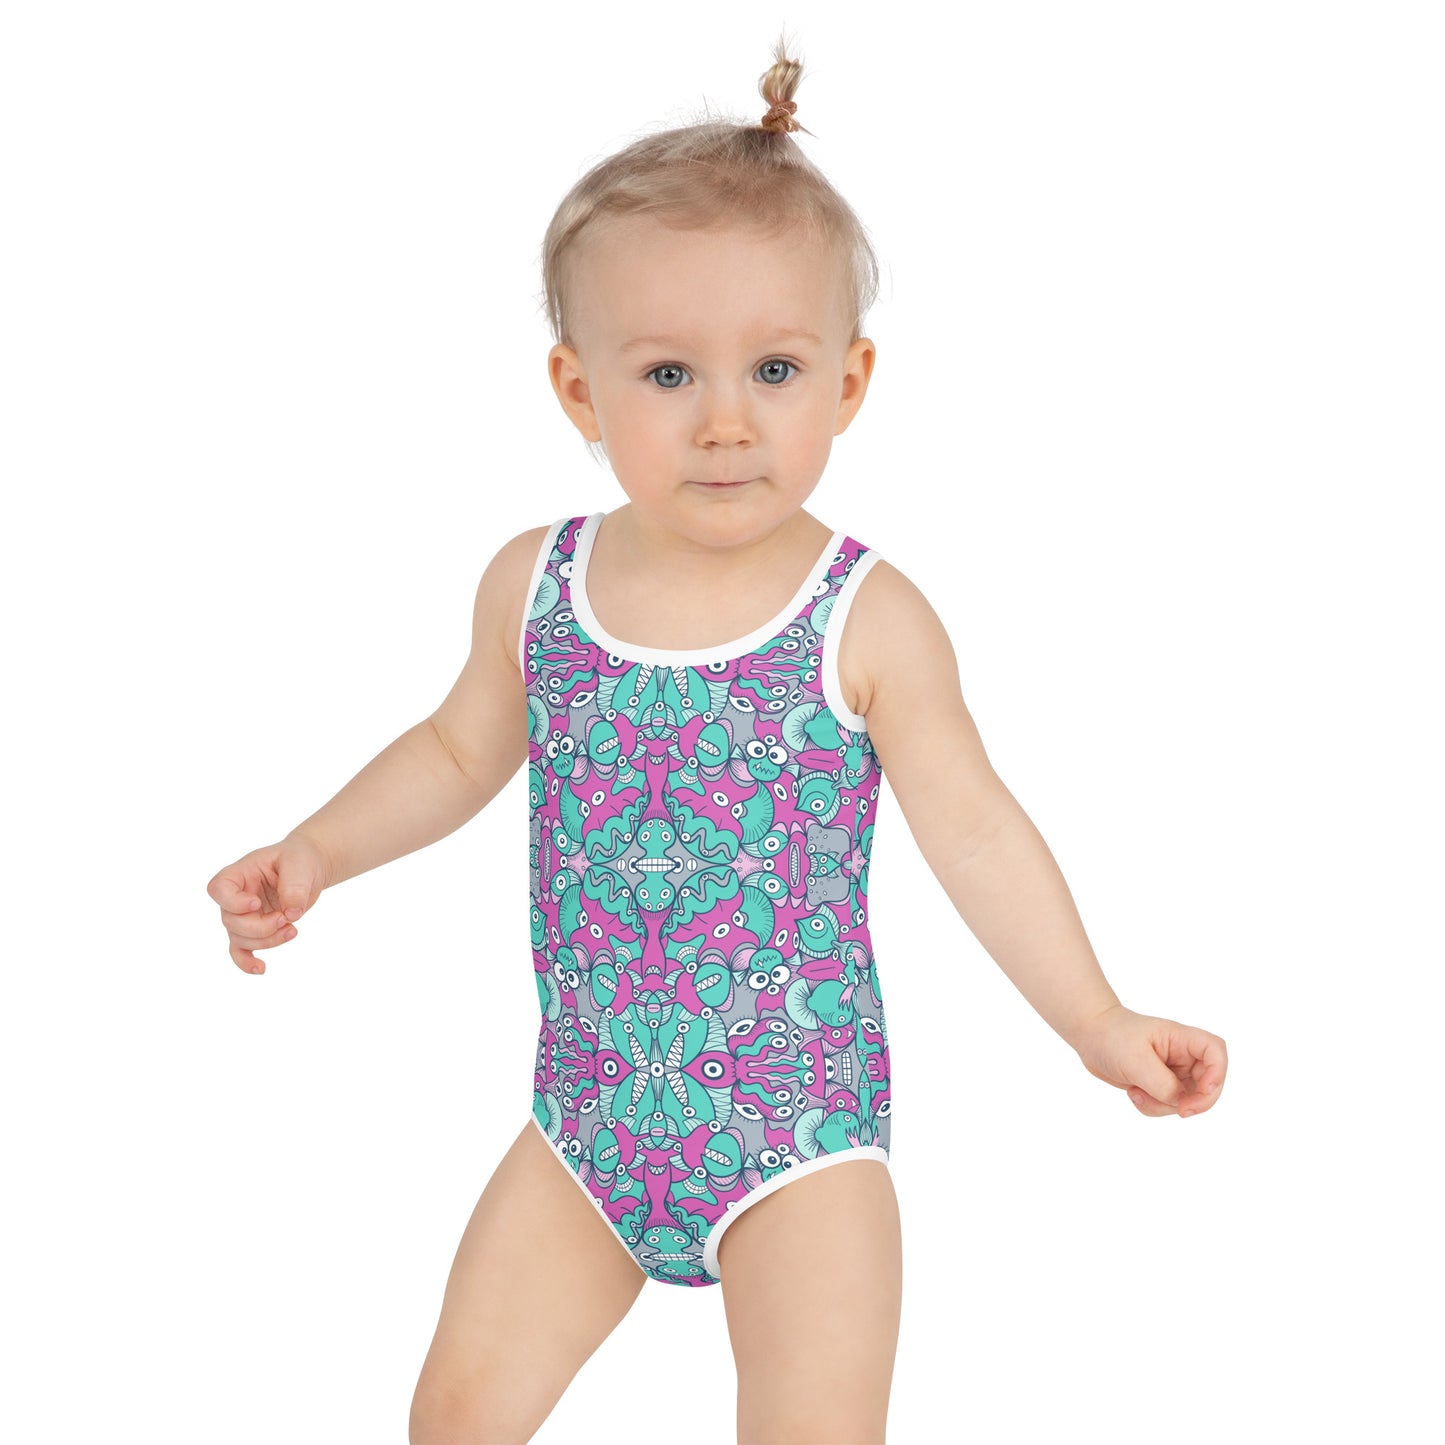 Sea creatures from an alien world All-Over Print Kids Swimsuit. Baby girl